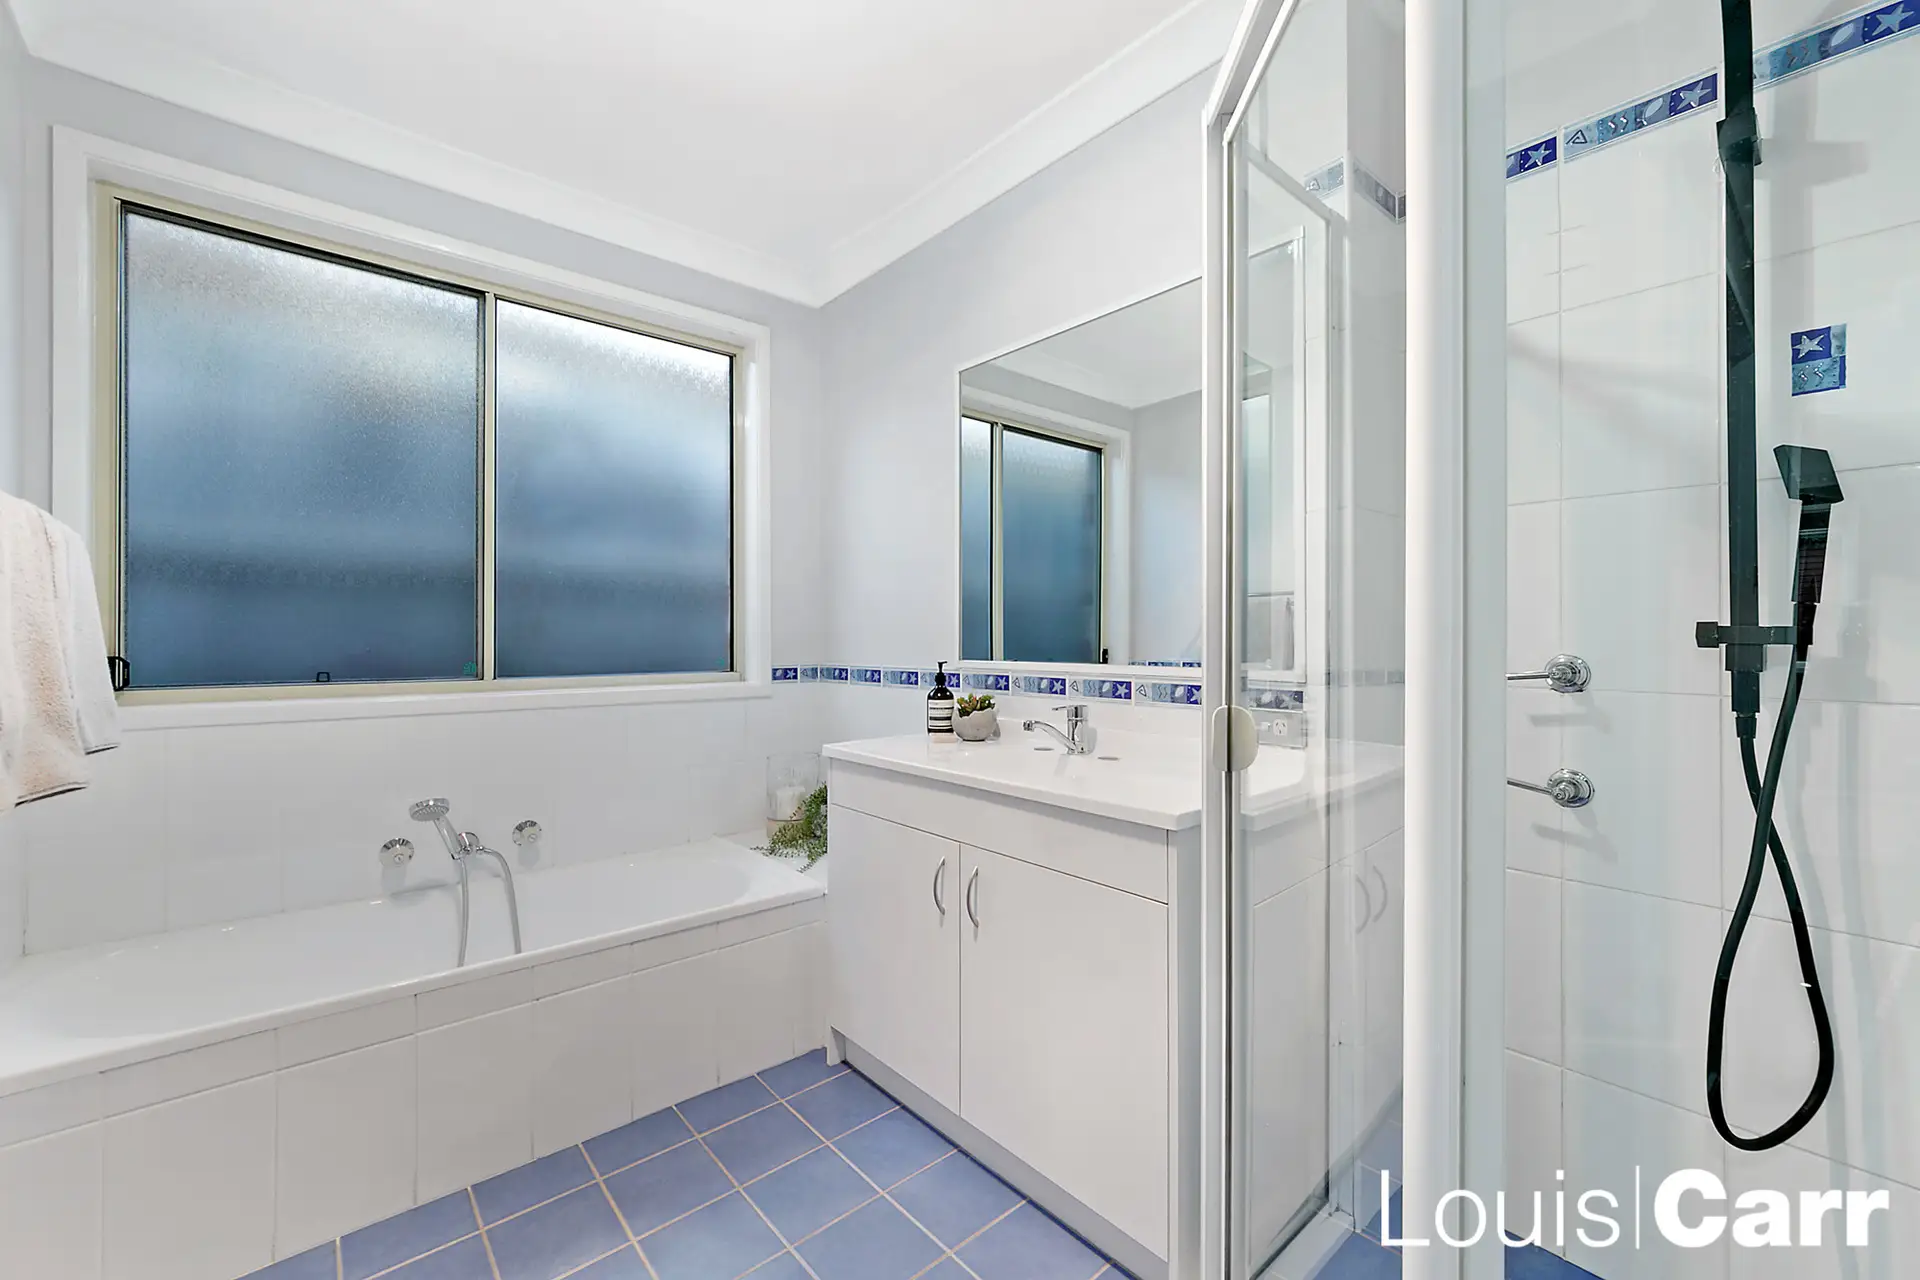 Photo #10: 17 Hotham Avenue, Beaumont Hills - Sold by Louis Carr Real Estate